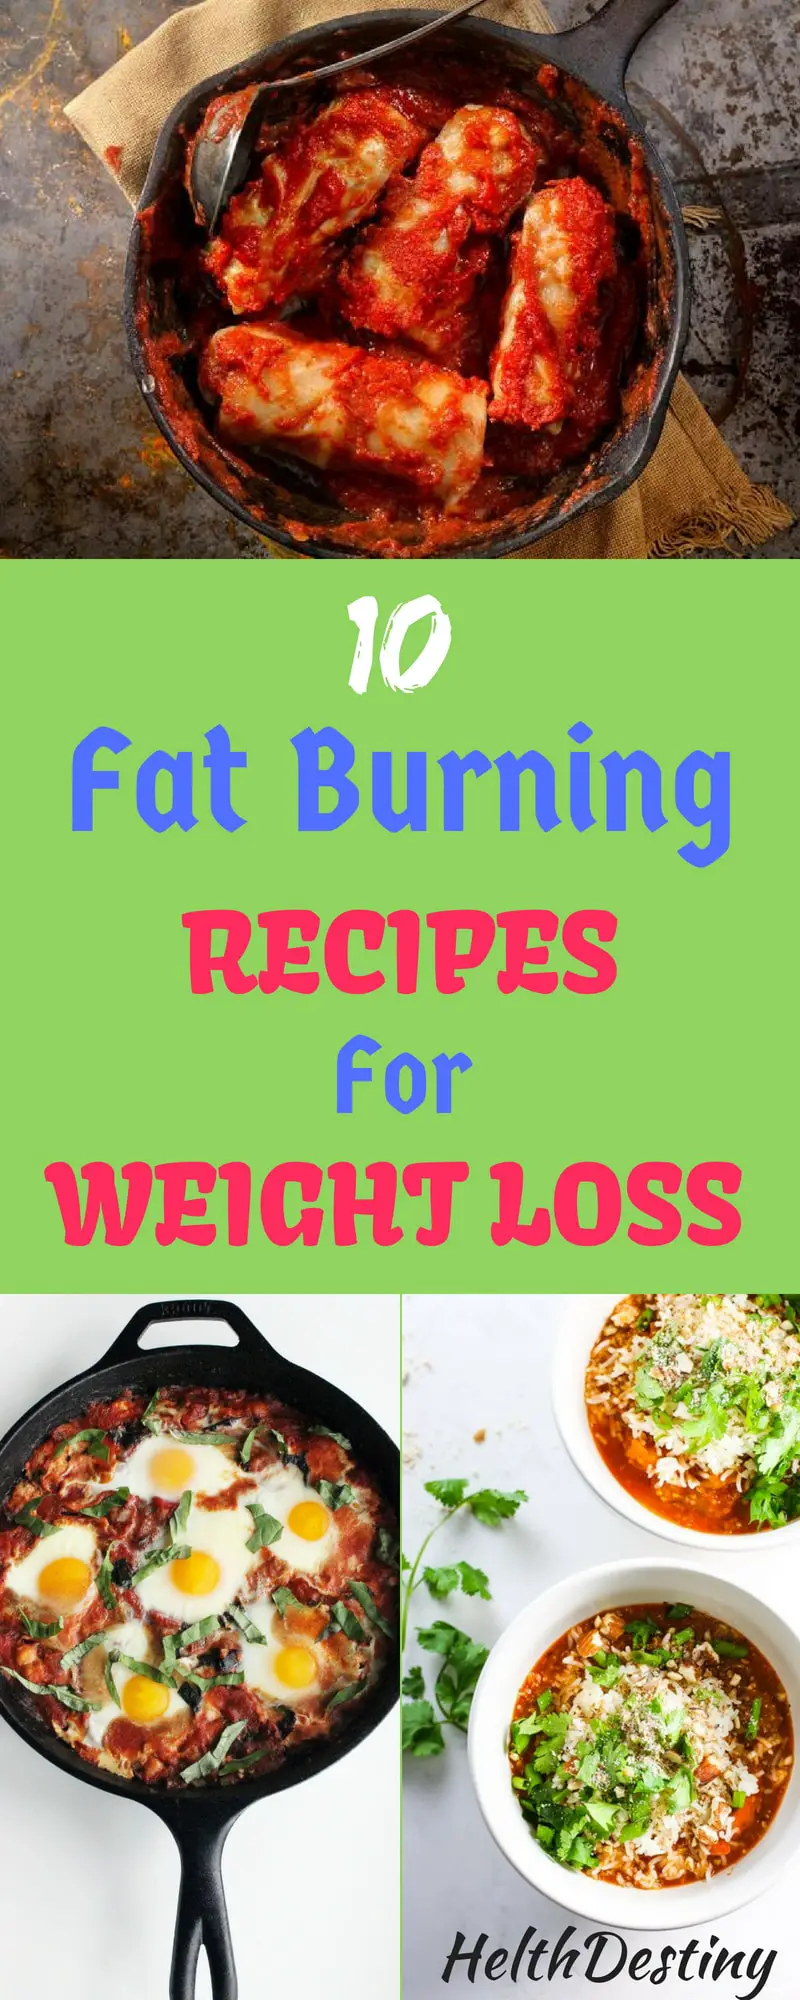 10 Fat Burning recipes for Weight loss